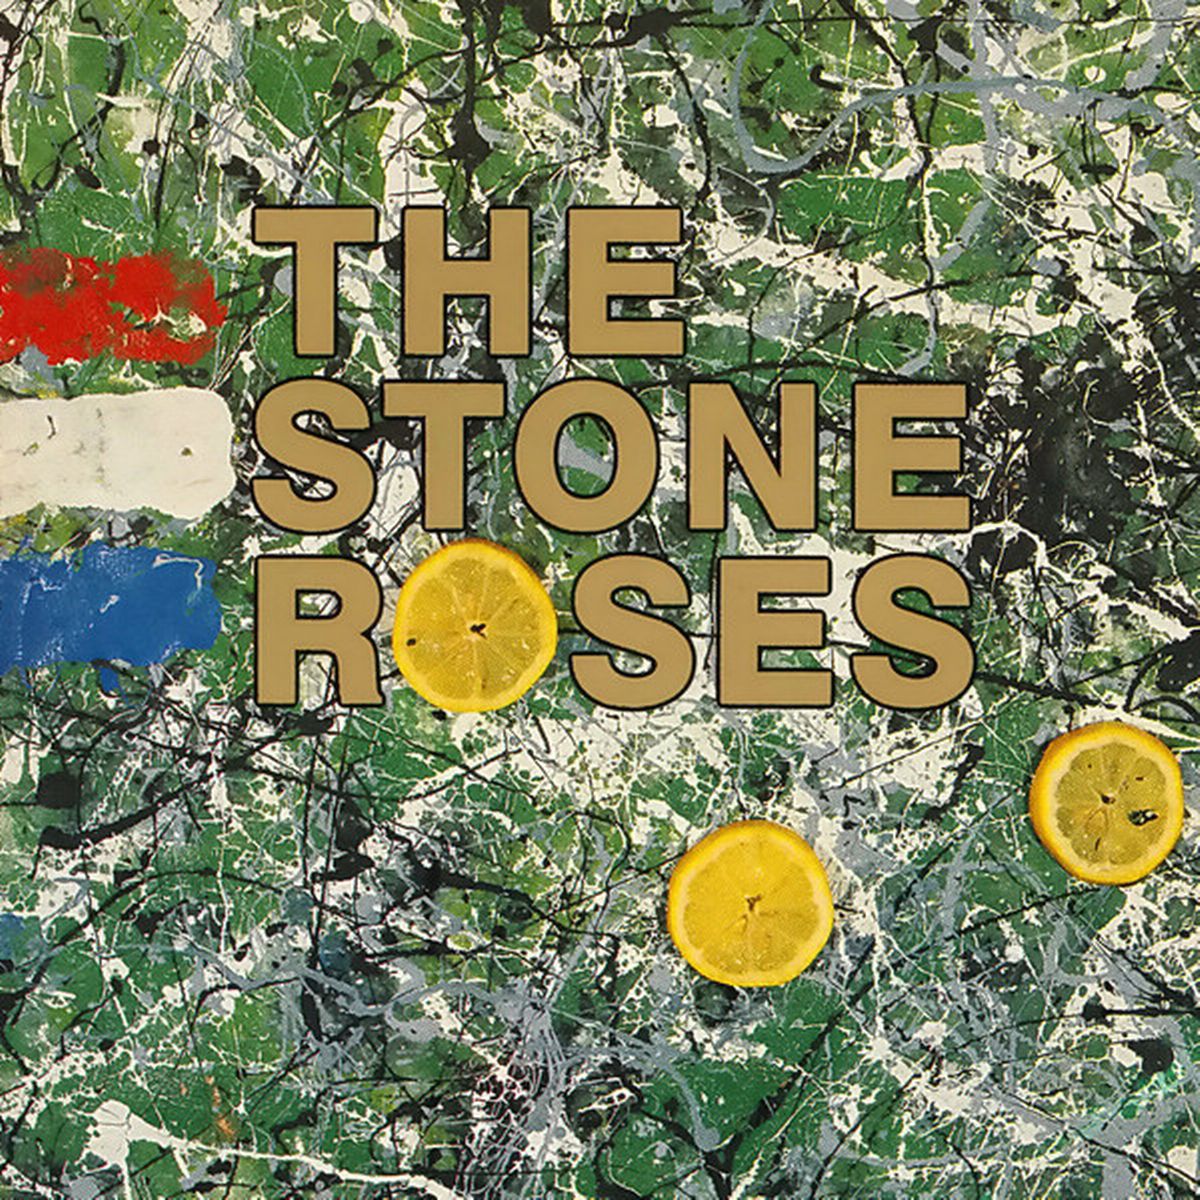 The Stone Roses (Transparent Vinyl) by The Stone Roses